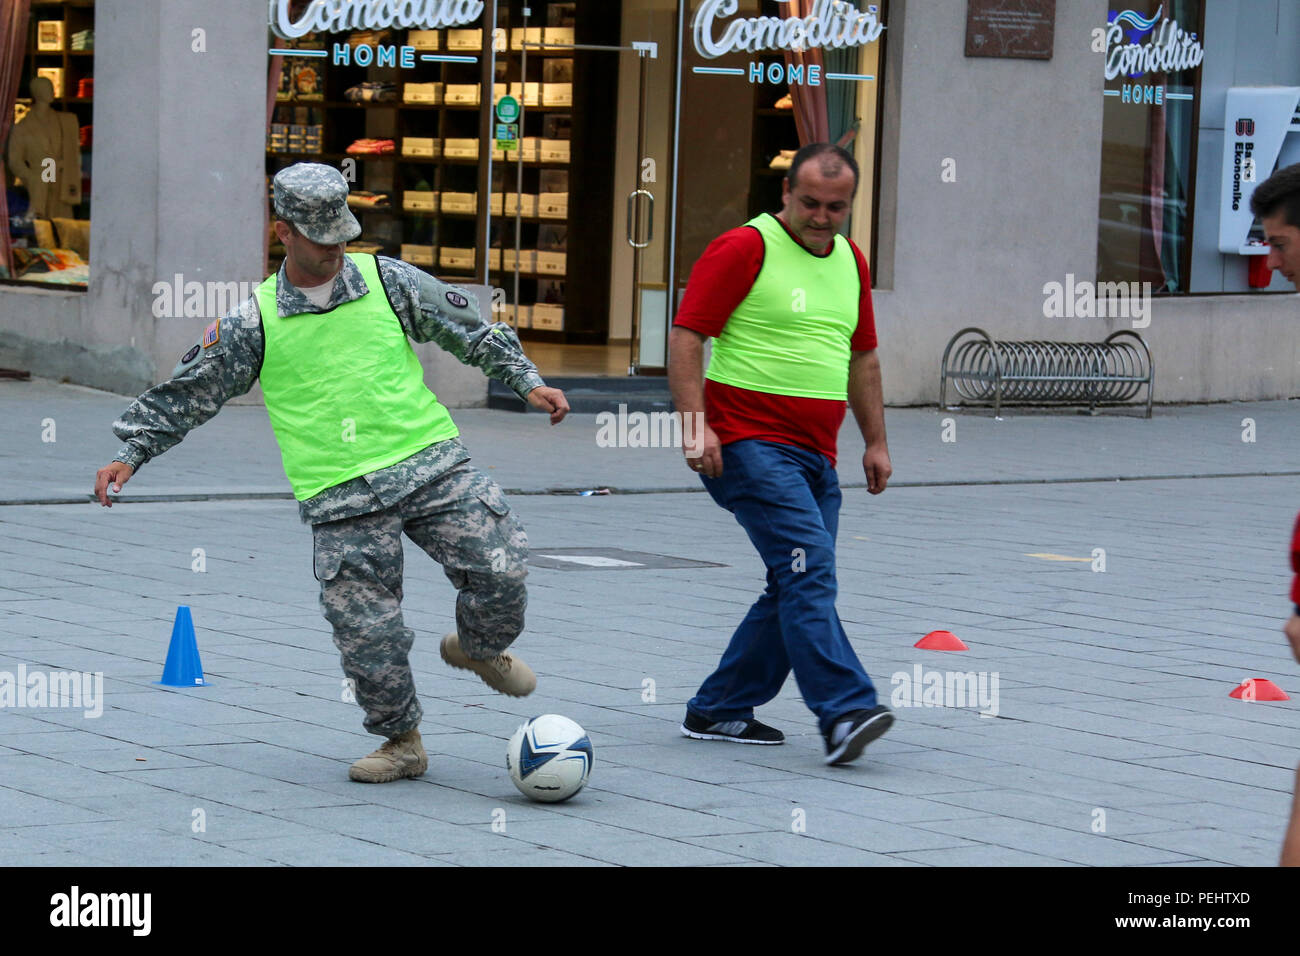 Chief Warrant Officer 2 Jason Boyd, a North Carolina National Guard Soldier deployed to Kosovo with the 30th Armored Brigade Combat Team headquarters, kicks a soccer ball while leading a game about stereotypes and prejudice, Aug. 22, 2015, at the Anibar International Animation Festival in Peja, Kosovo. Boyd and other U.S. Army Soldiers serving in Kosovo volunteered their off-time to support the Pristina Rotary Club’s Violence-Free Future program, which uses games to mimic real-life situations, then discusses them in hopes of promoting pro-social behavior among Kosovo’s youth. The 30th ABCT hea Stock Photo